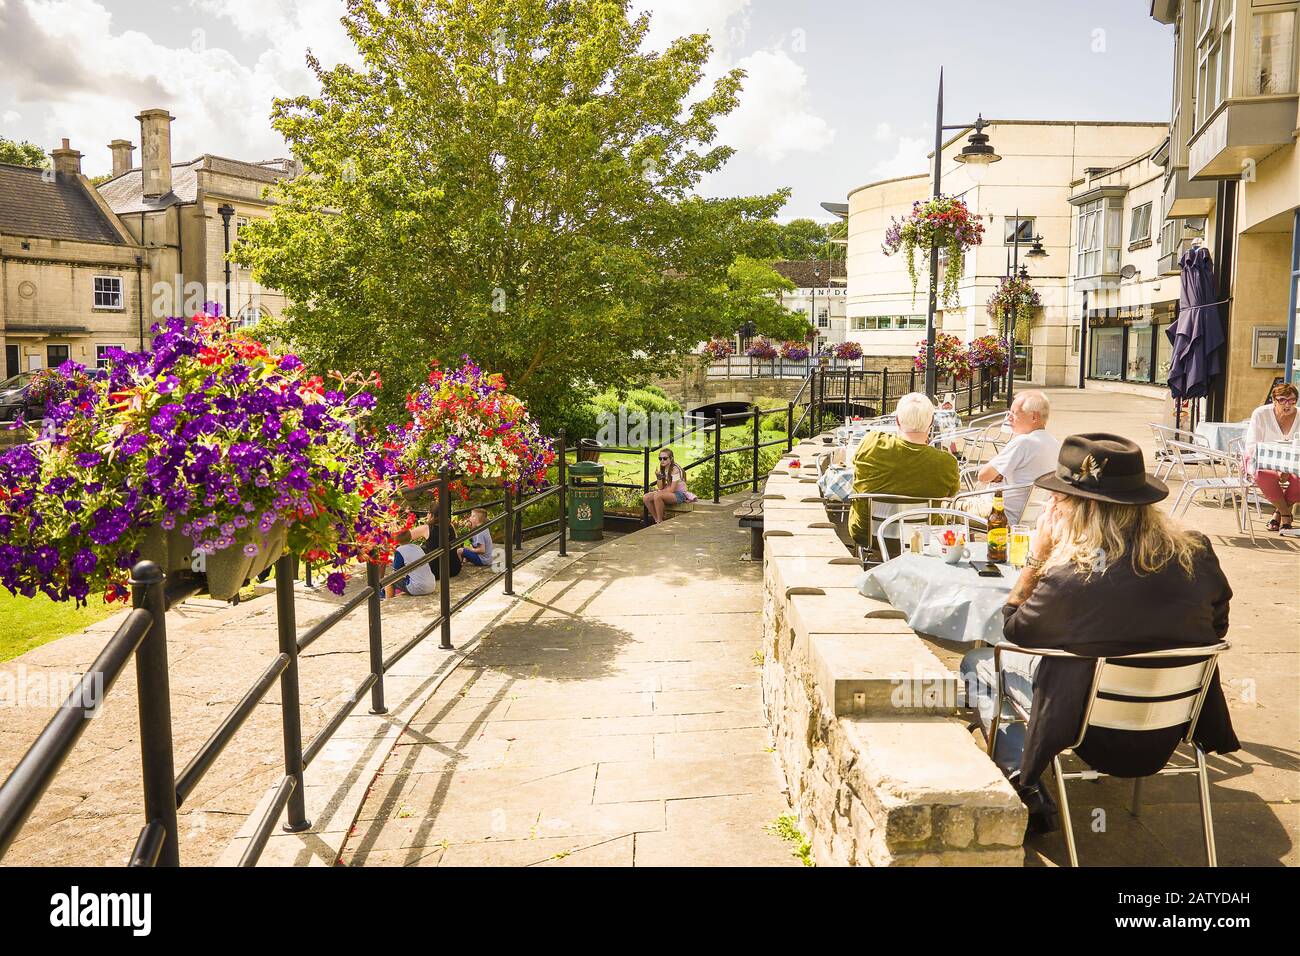 Open air eating and drinking on a sunlit terrace in the heart of Calne in Wiltshire England UK Stock Photo